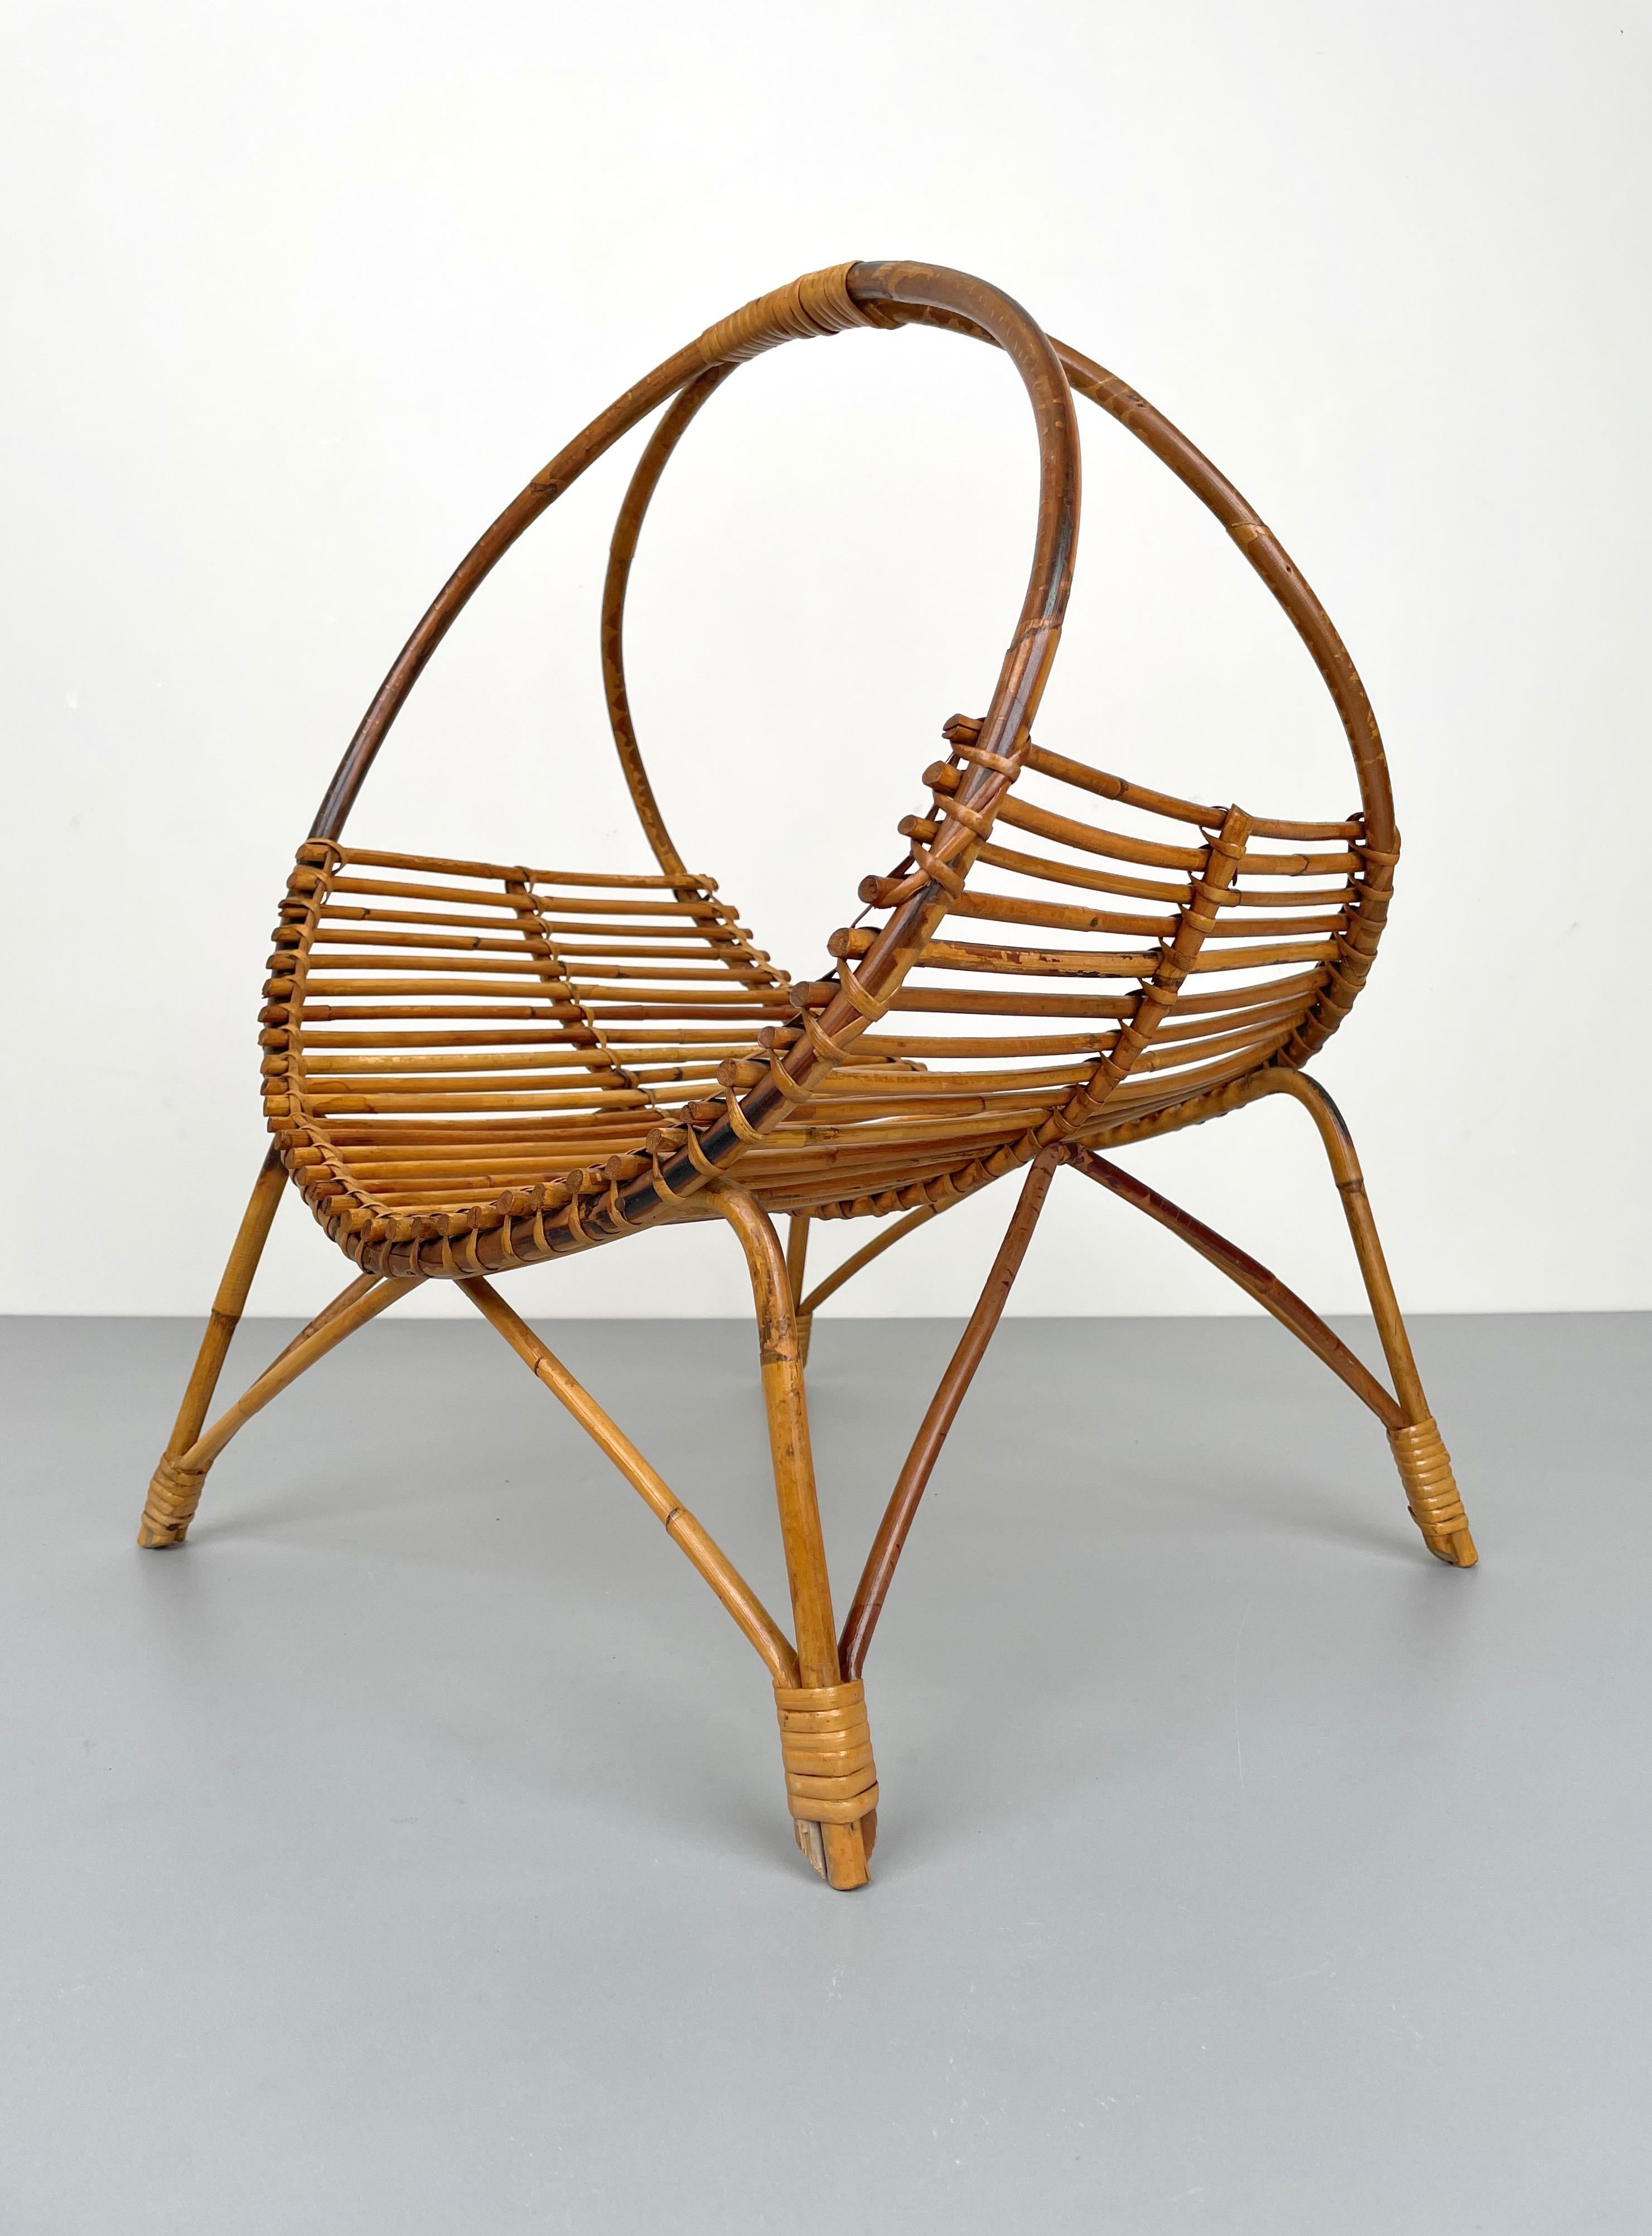 Italian Rattan & Bamboo Curved Magazine Rack, Italy, 1960s For Sale